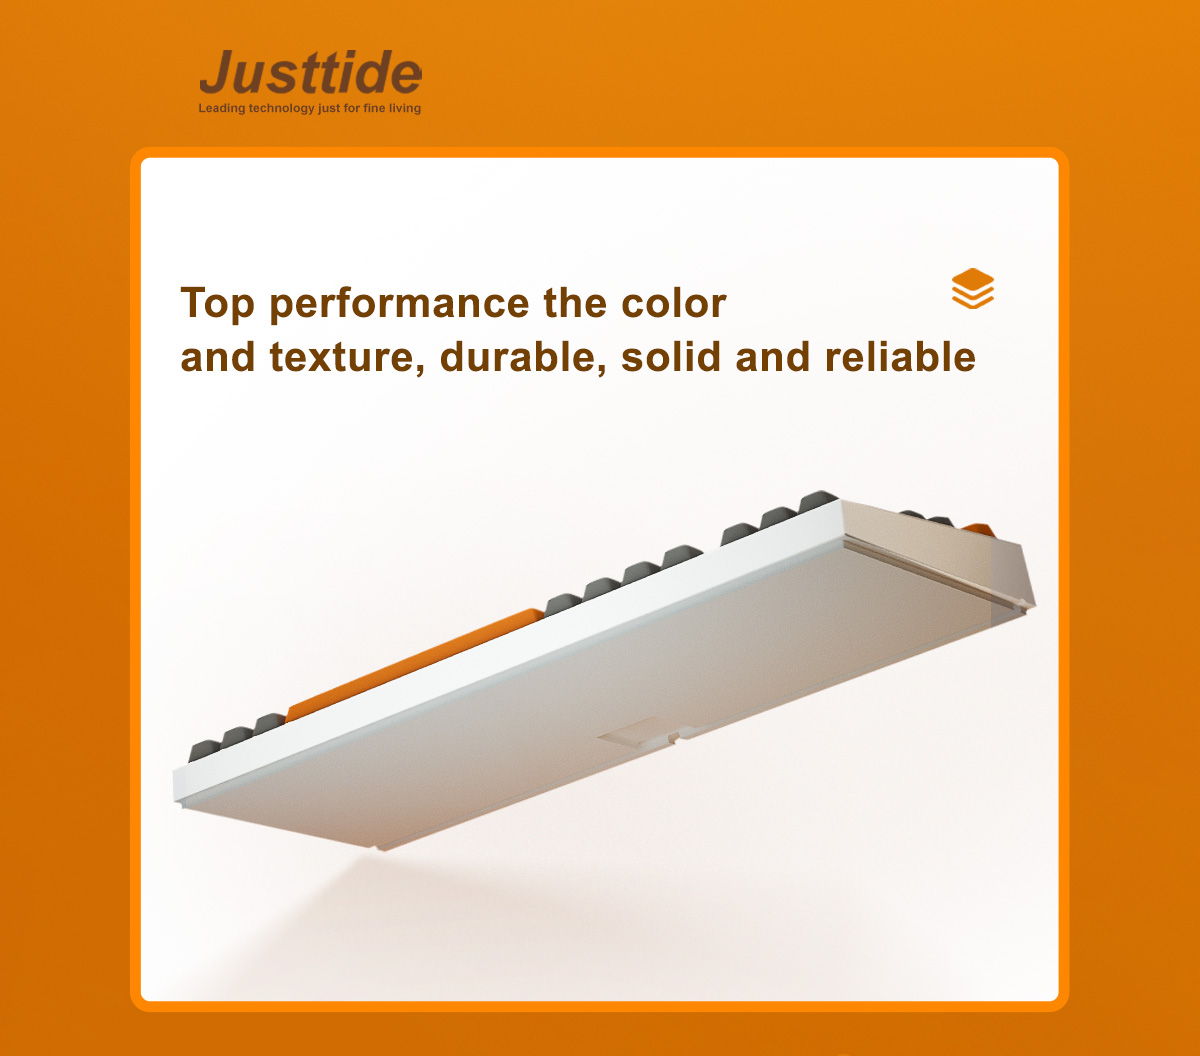 Top performance,durable,solid and reliable